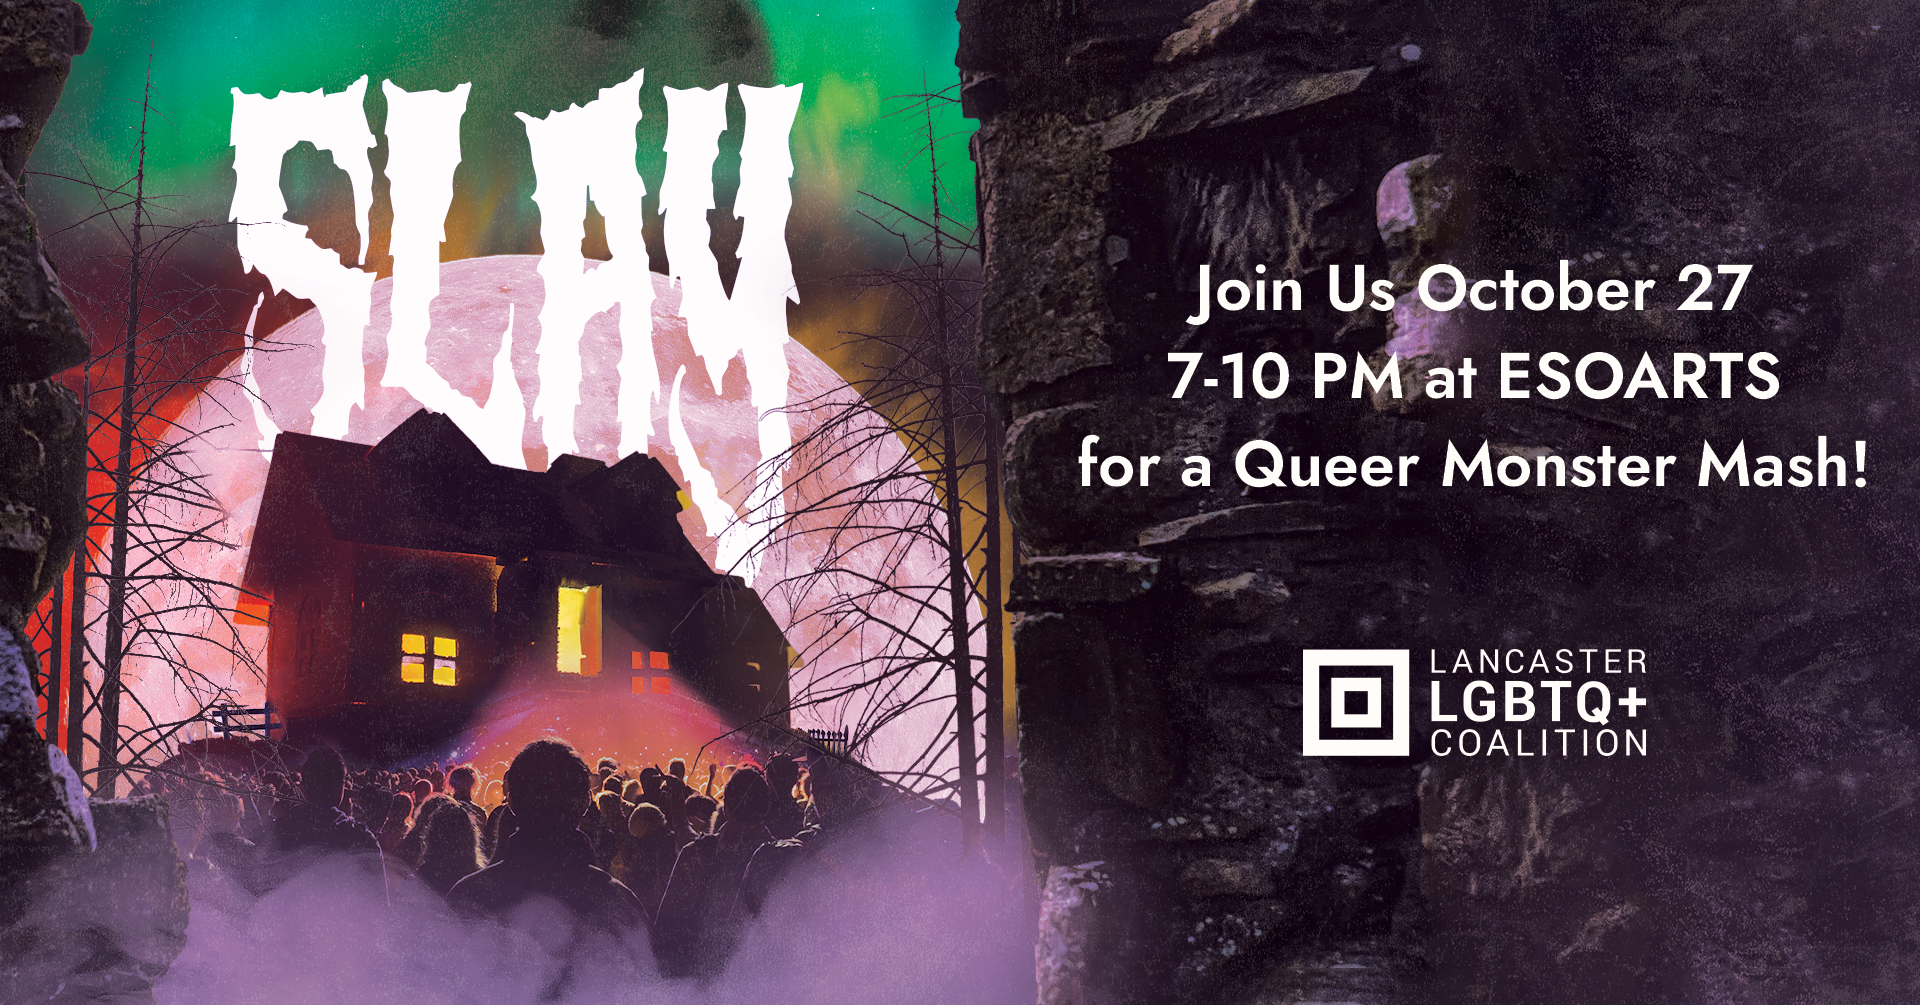 Get Ready to SLAY with Lancaster LGBTQ+ Coalition and ESOARTS this Halloween Season!